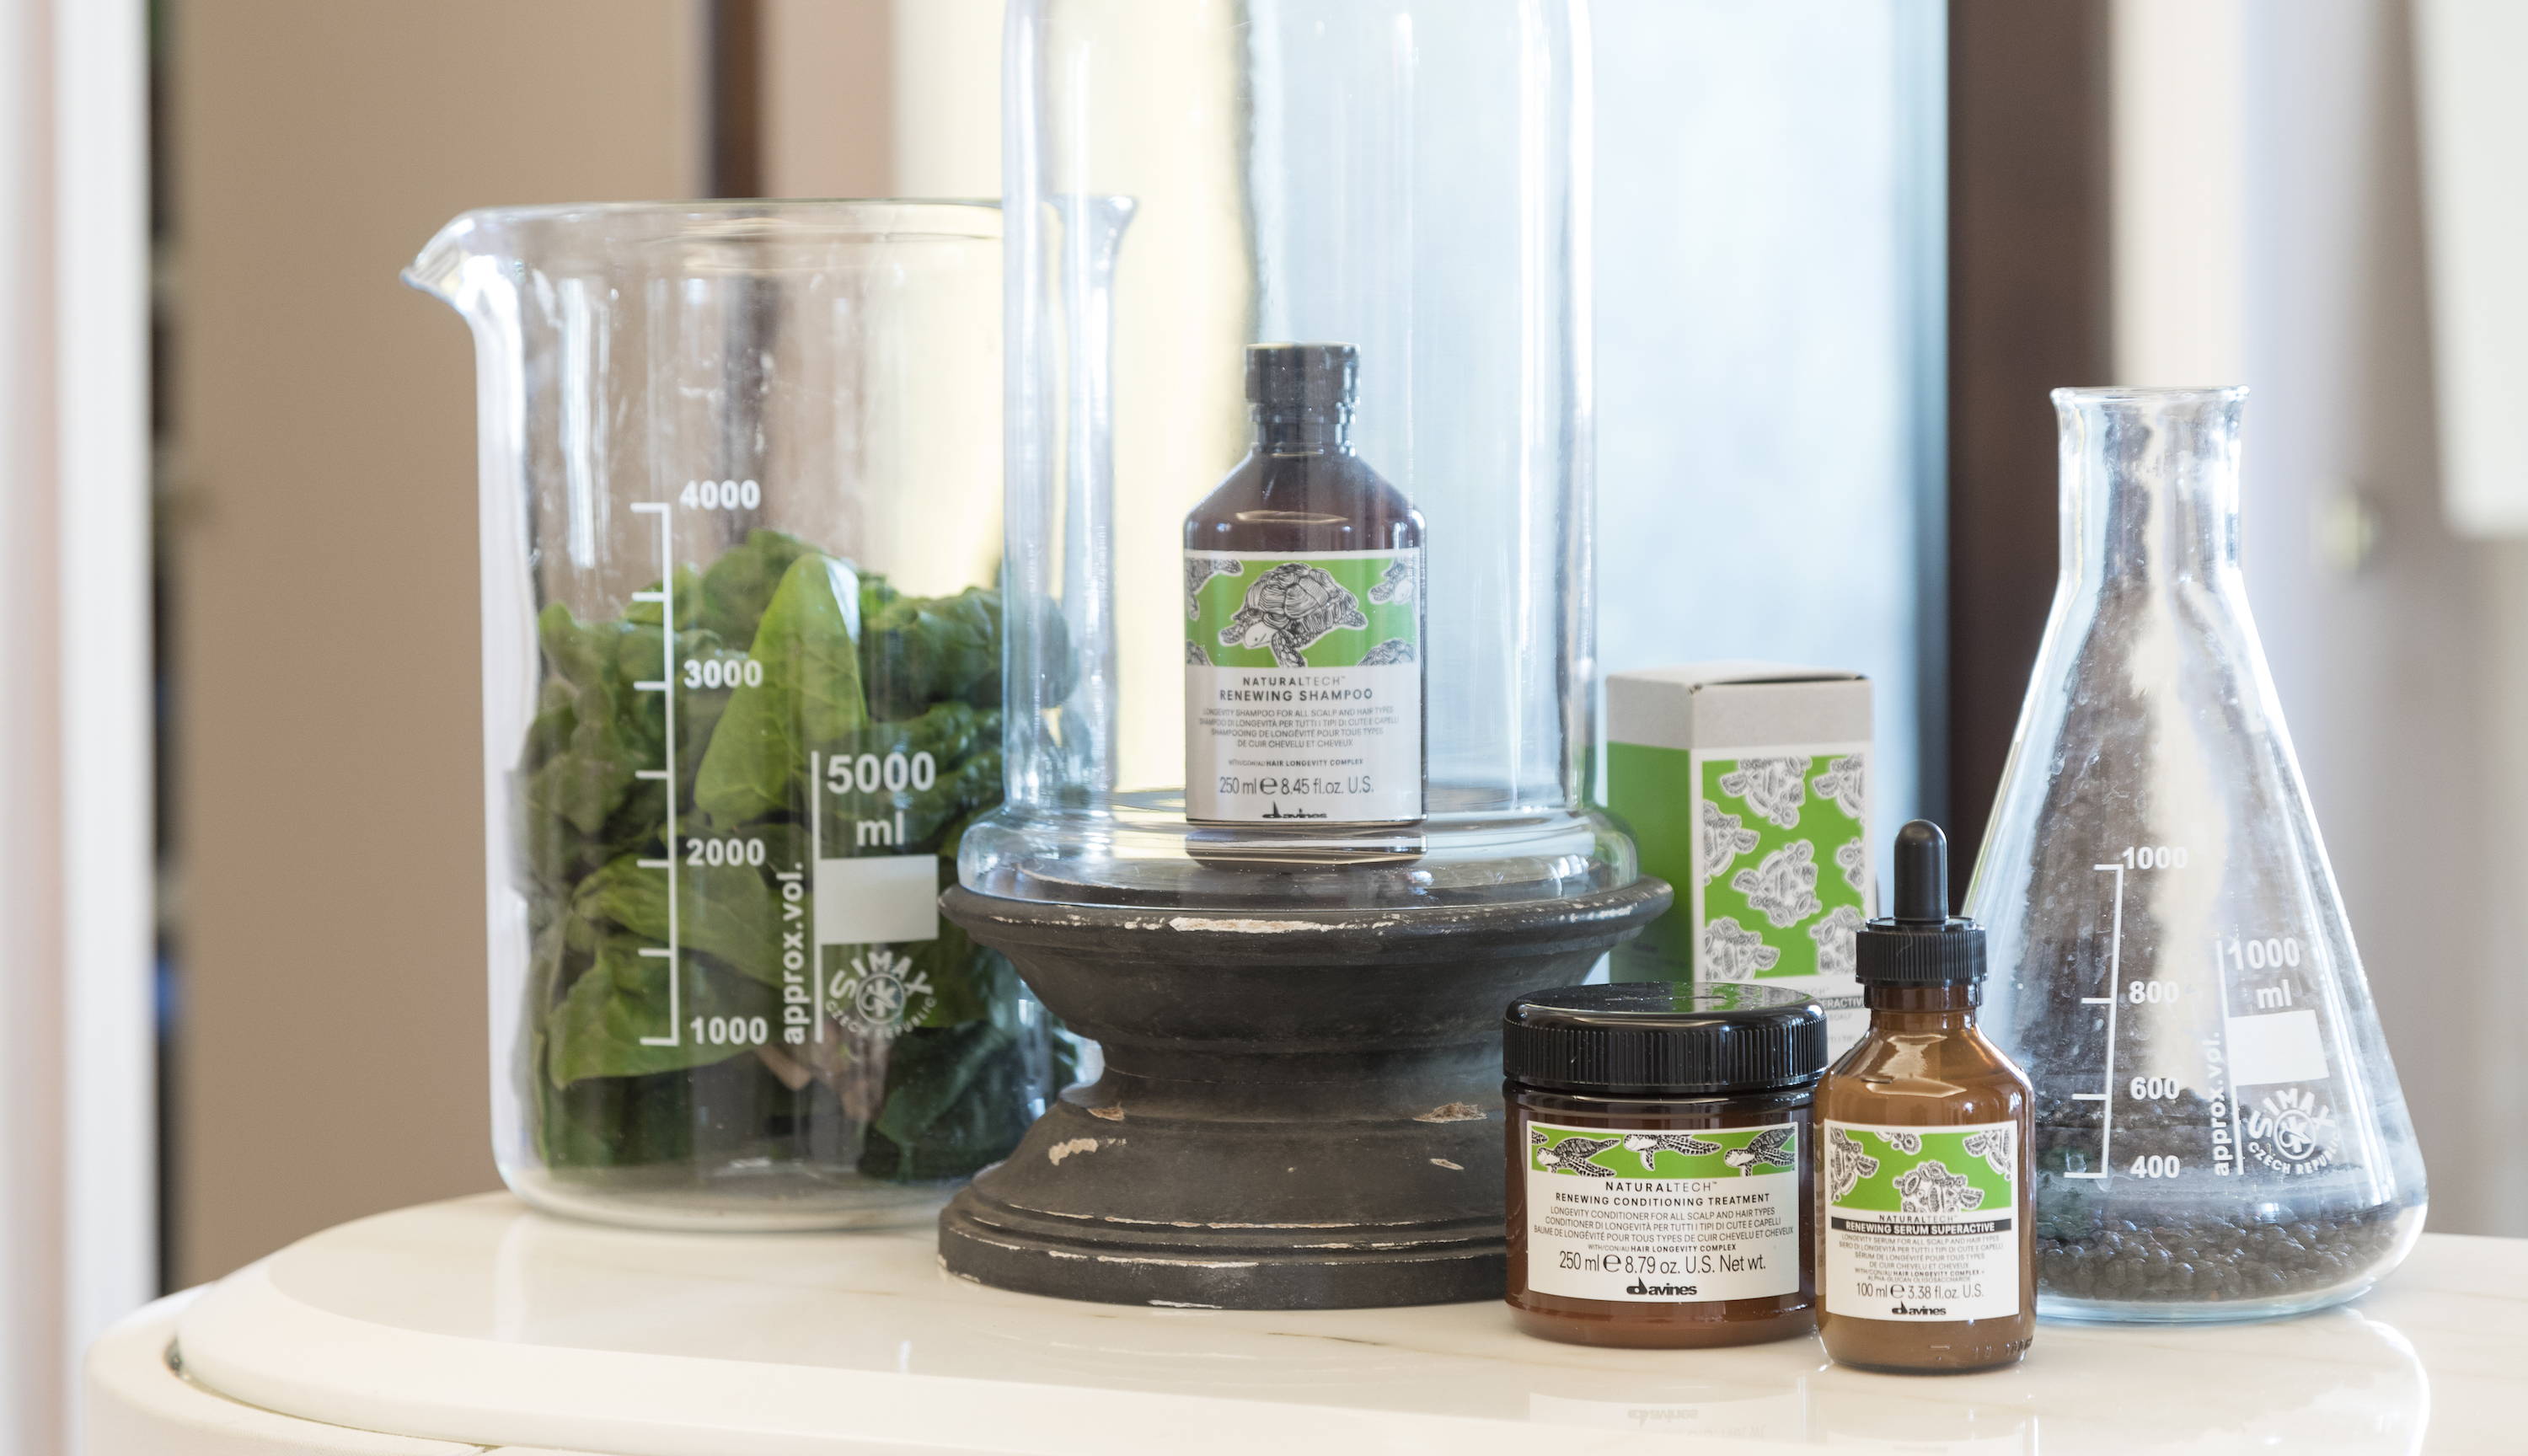 Davines Renewing hair care products